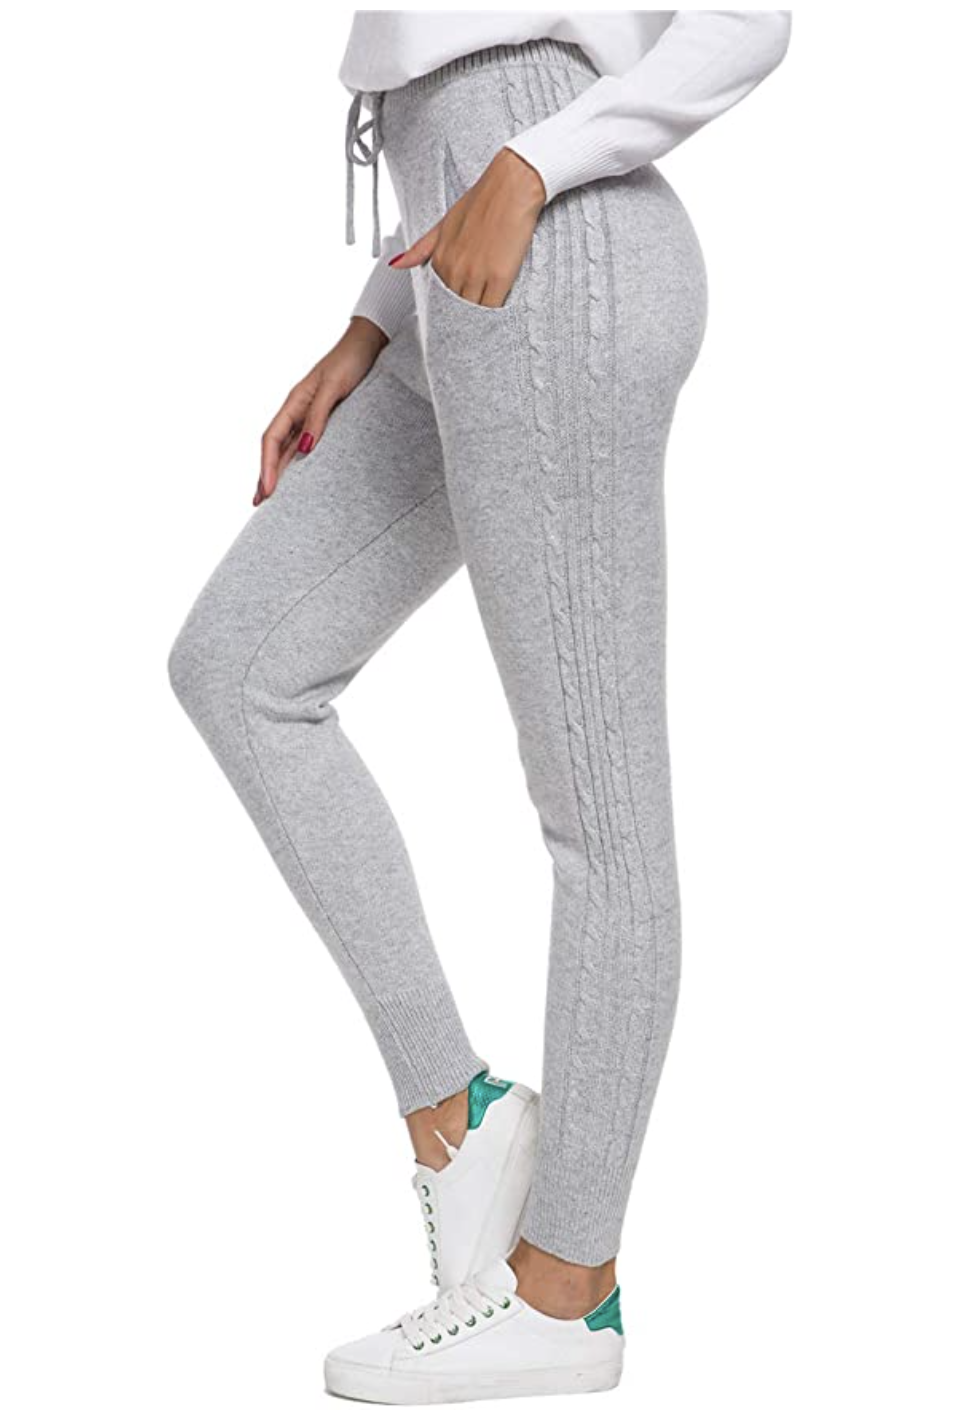 Daimidy Cashmere Joggers Are Under $40 and We're Buying Every Color